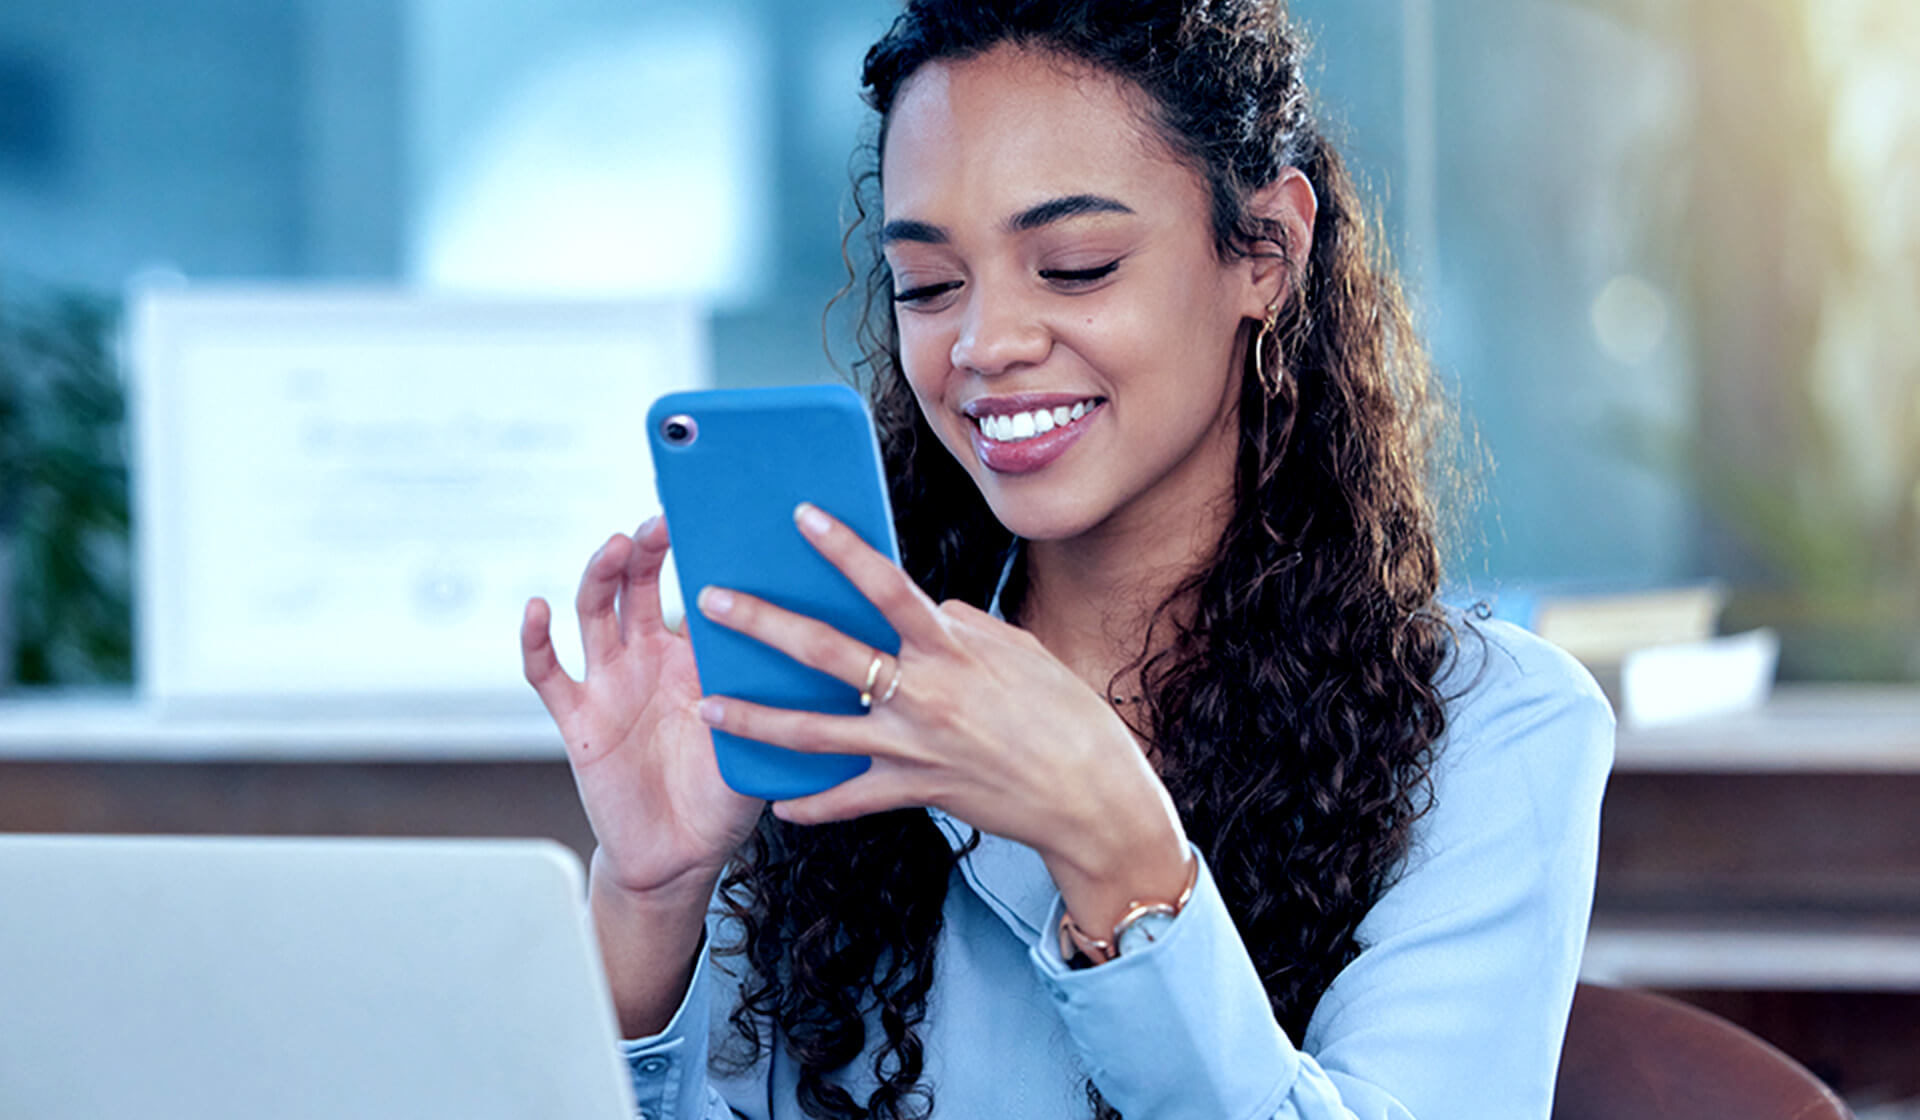 A woman smiling while looking at a mobile phone